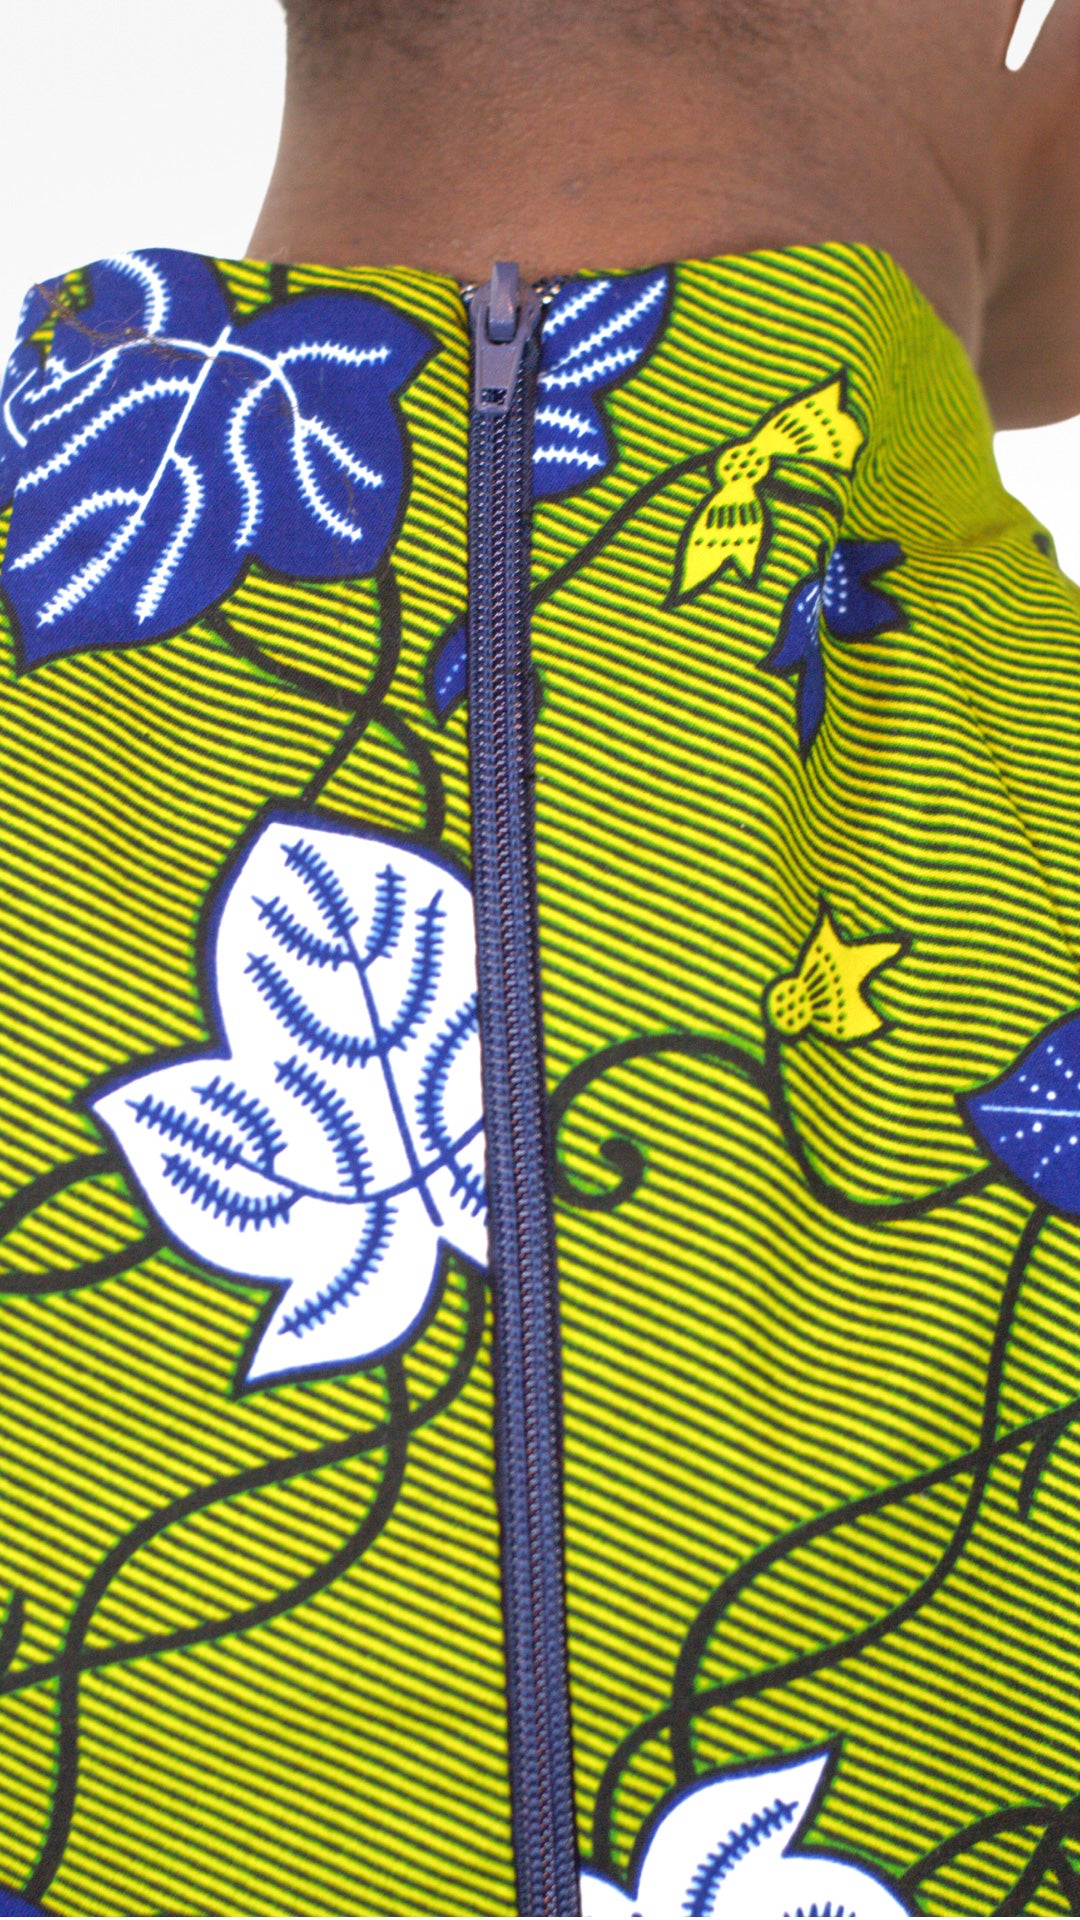 A close up rear view of the blue zipper of the khaki dress, added for functionality.